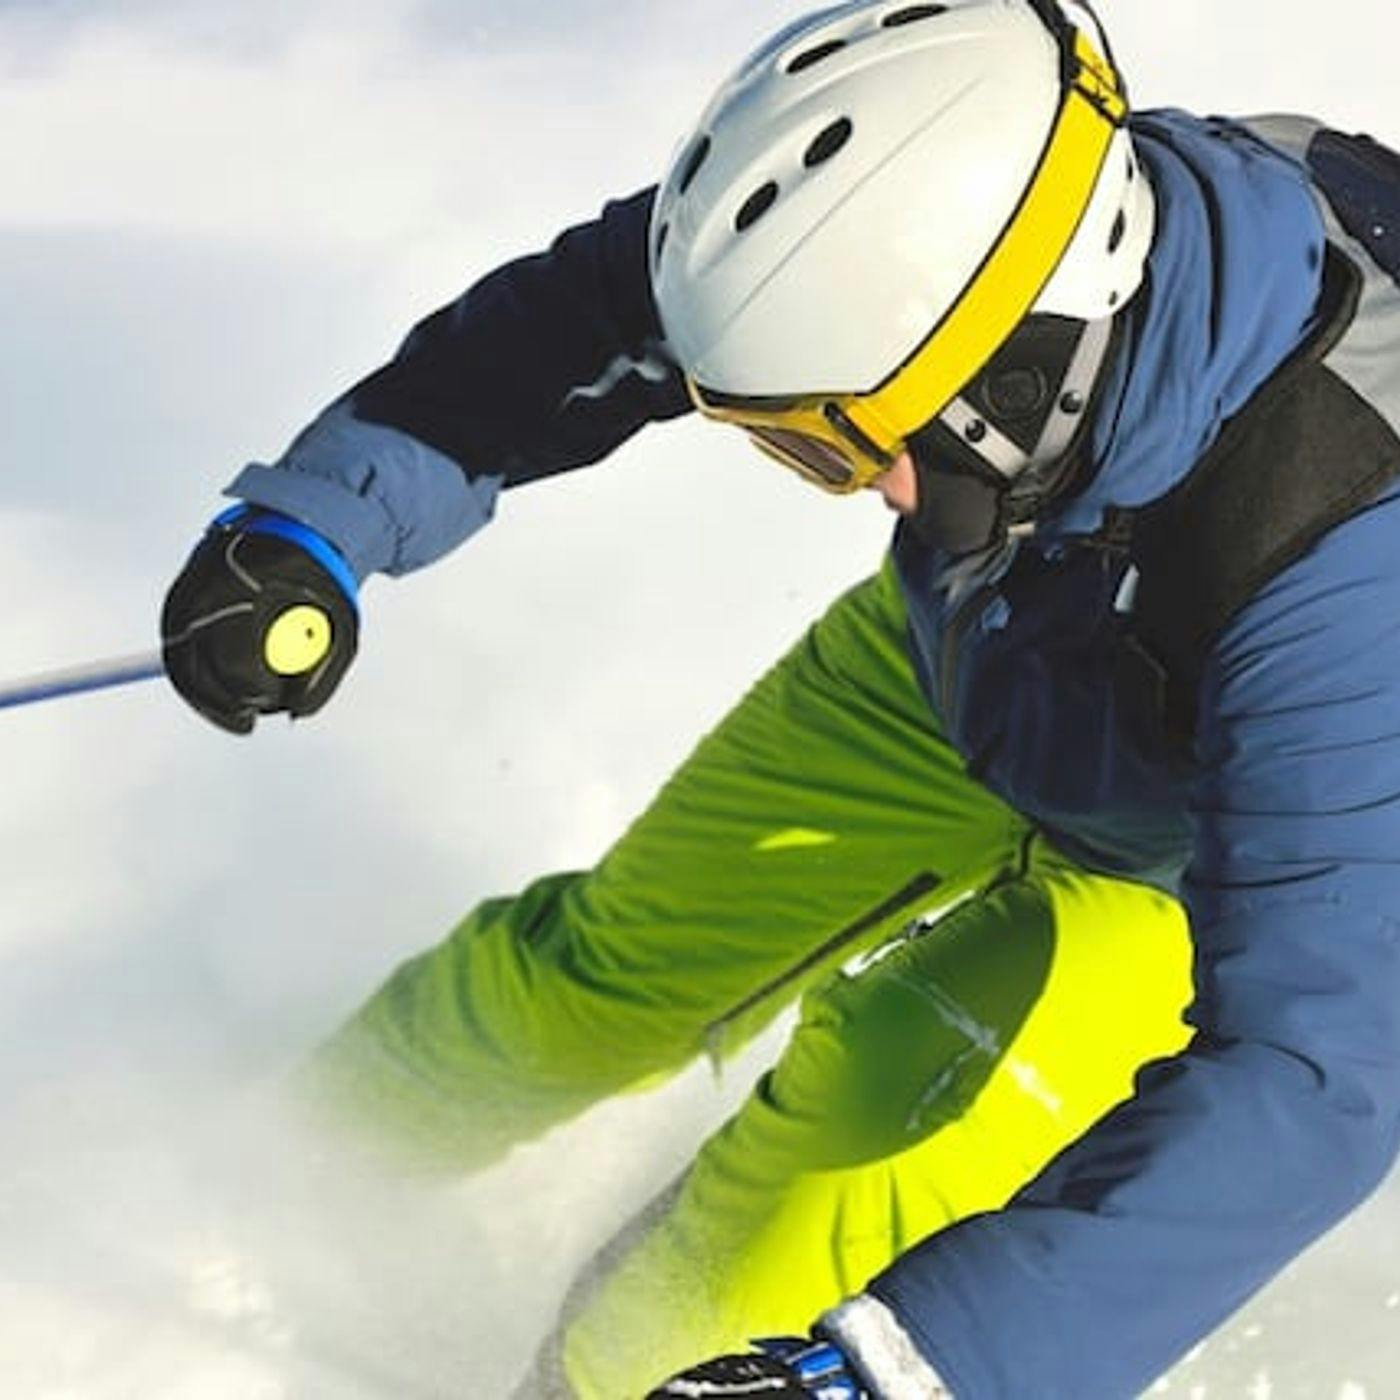 Skiing with or without a Helmet with Dr. Jeremy Alland from Rush